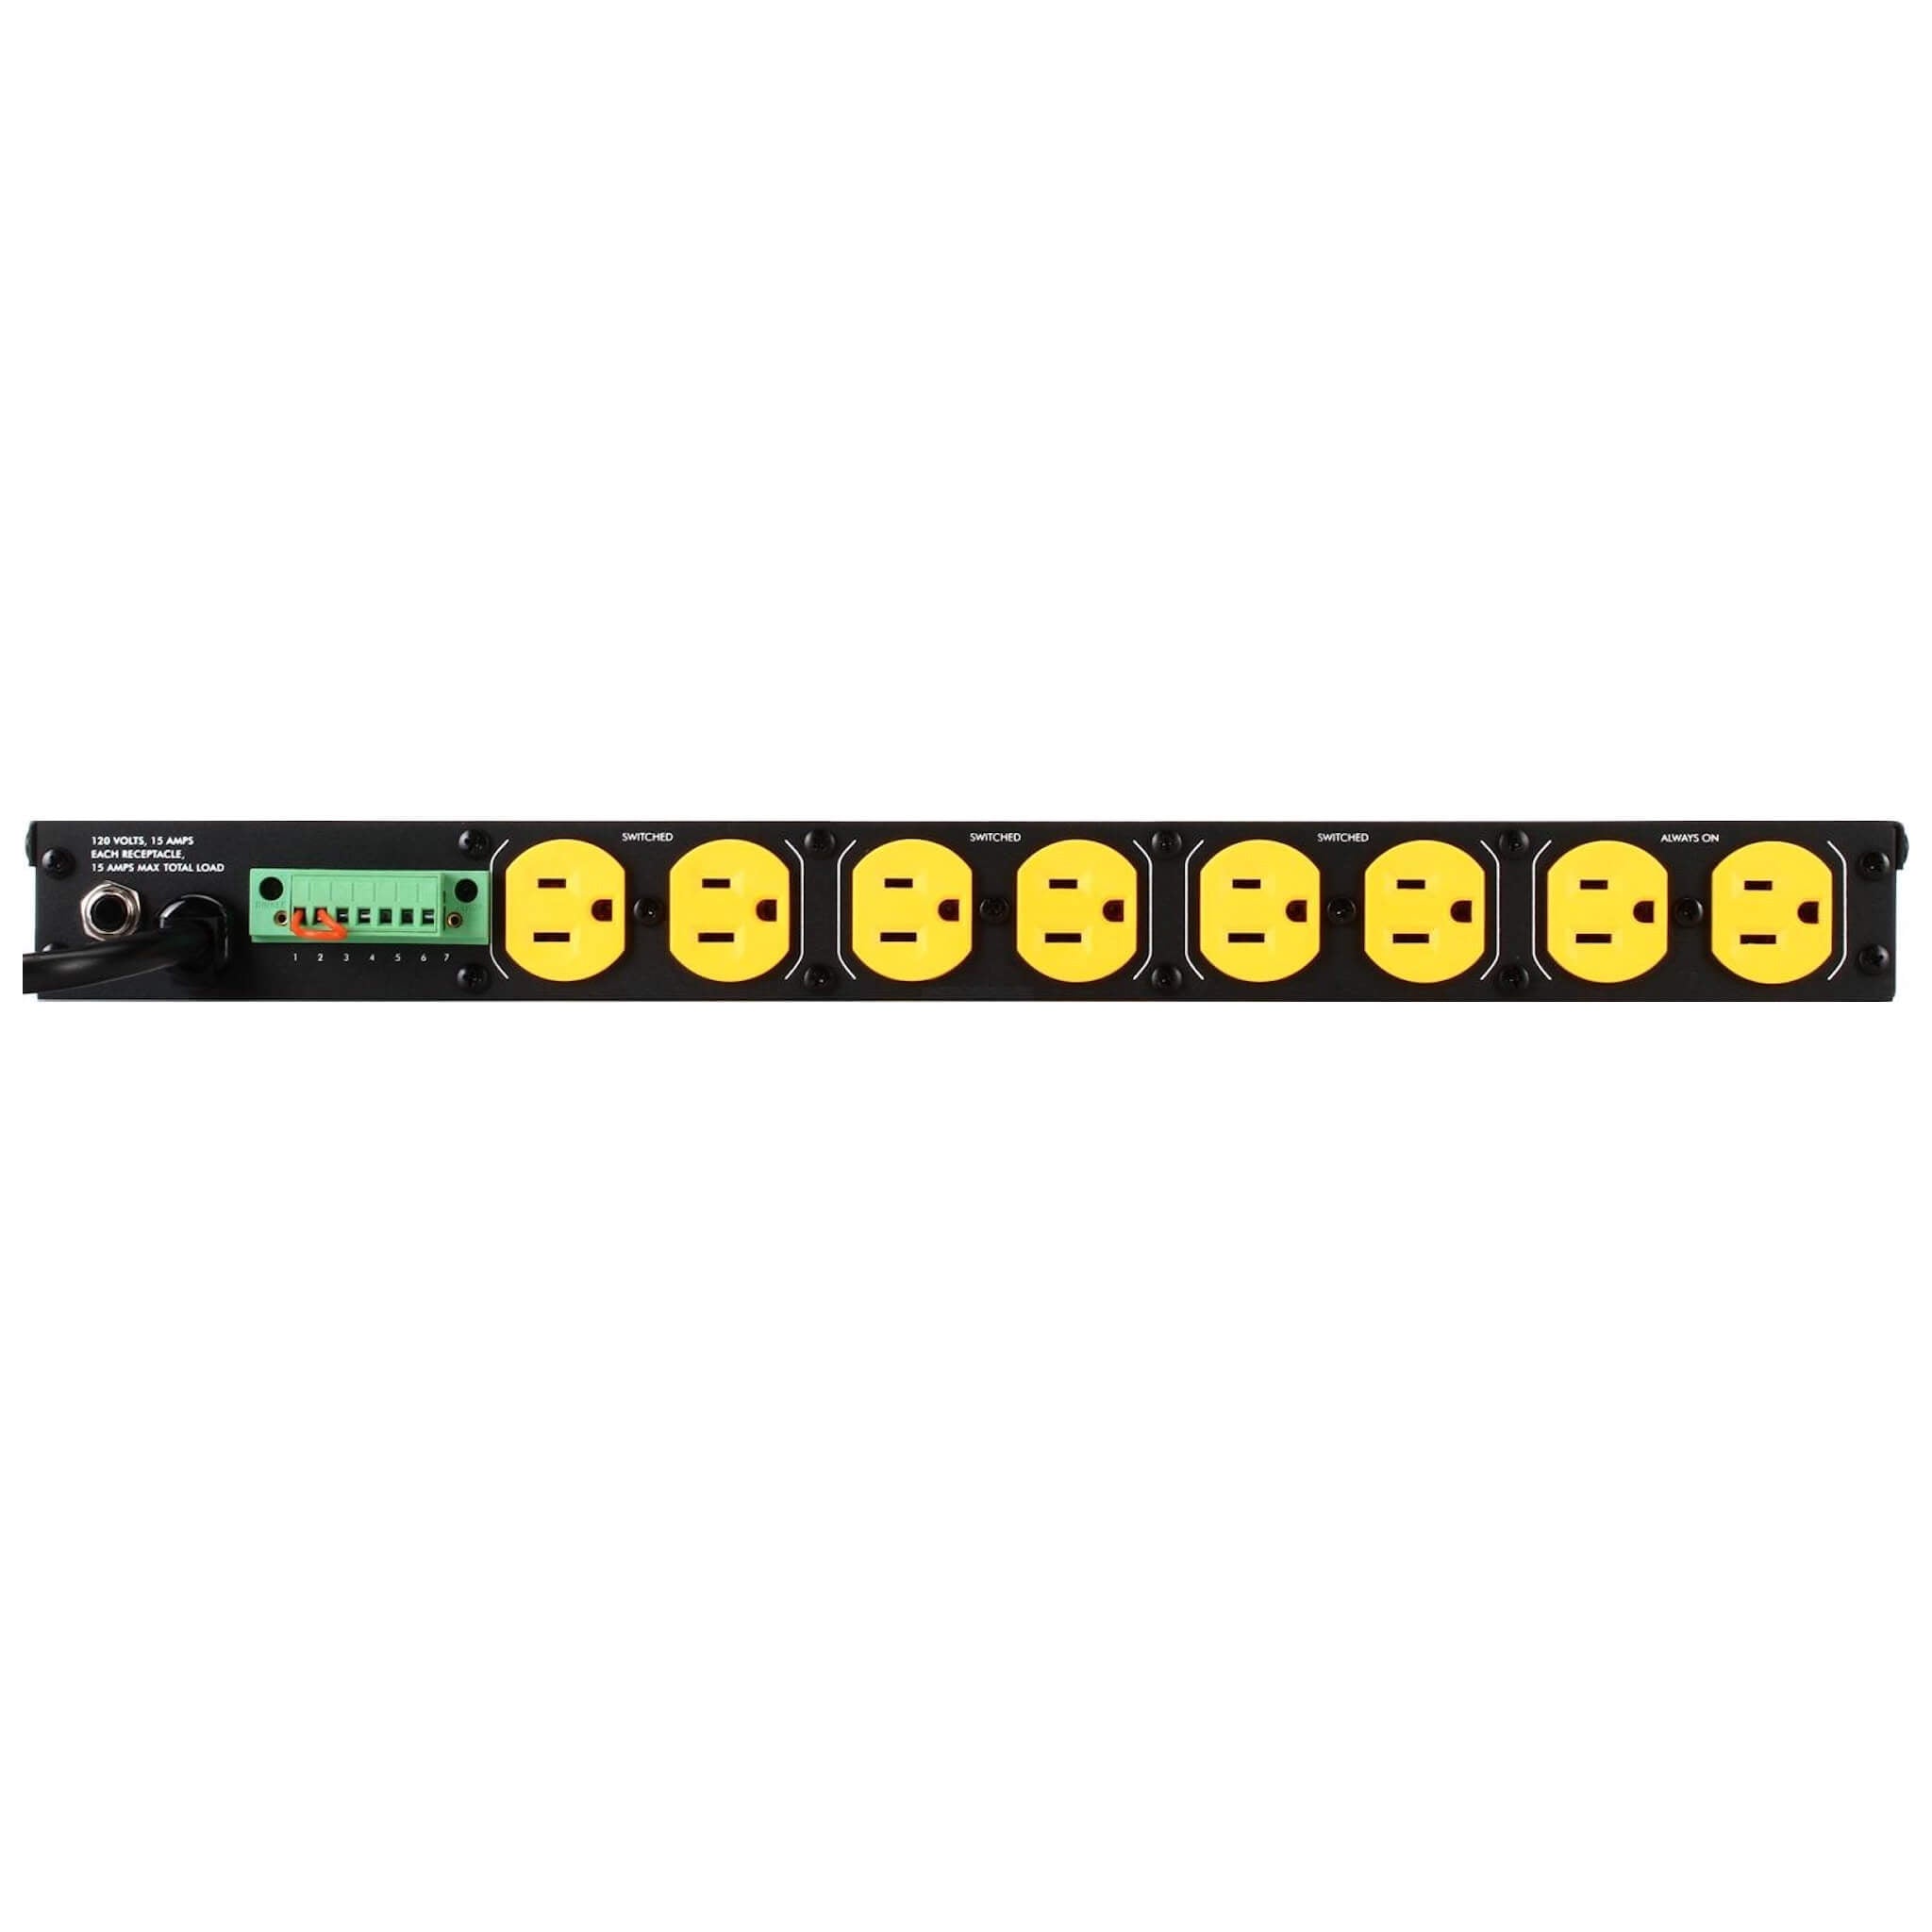 SurgeX SX1115-RT - 15A Rack-mount Surge Elimination with Remote Turn-on, rear